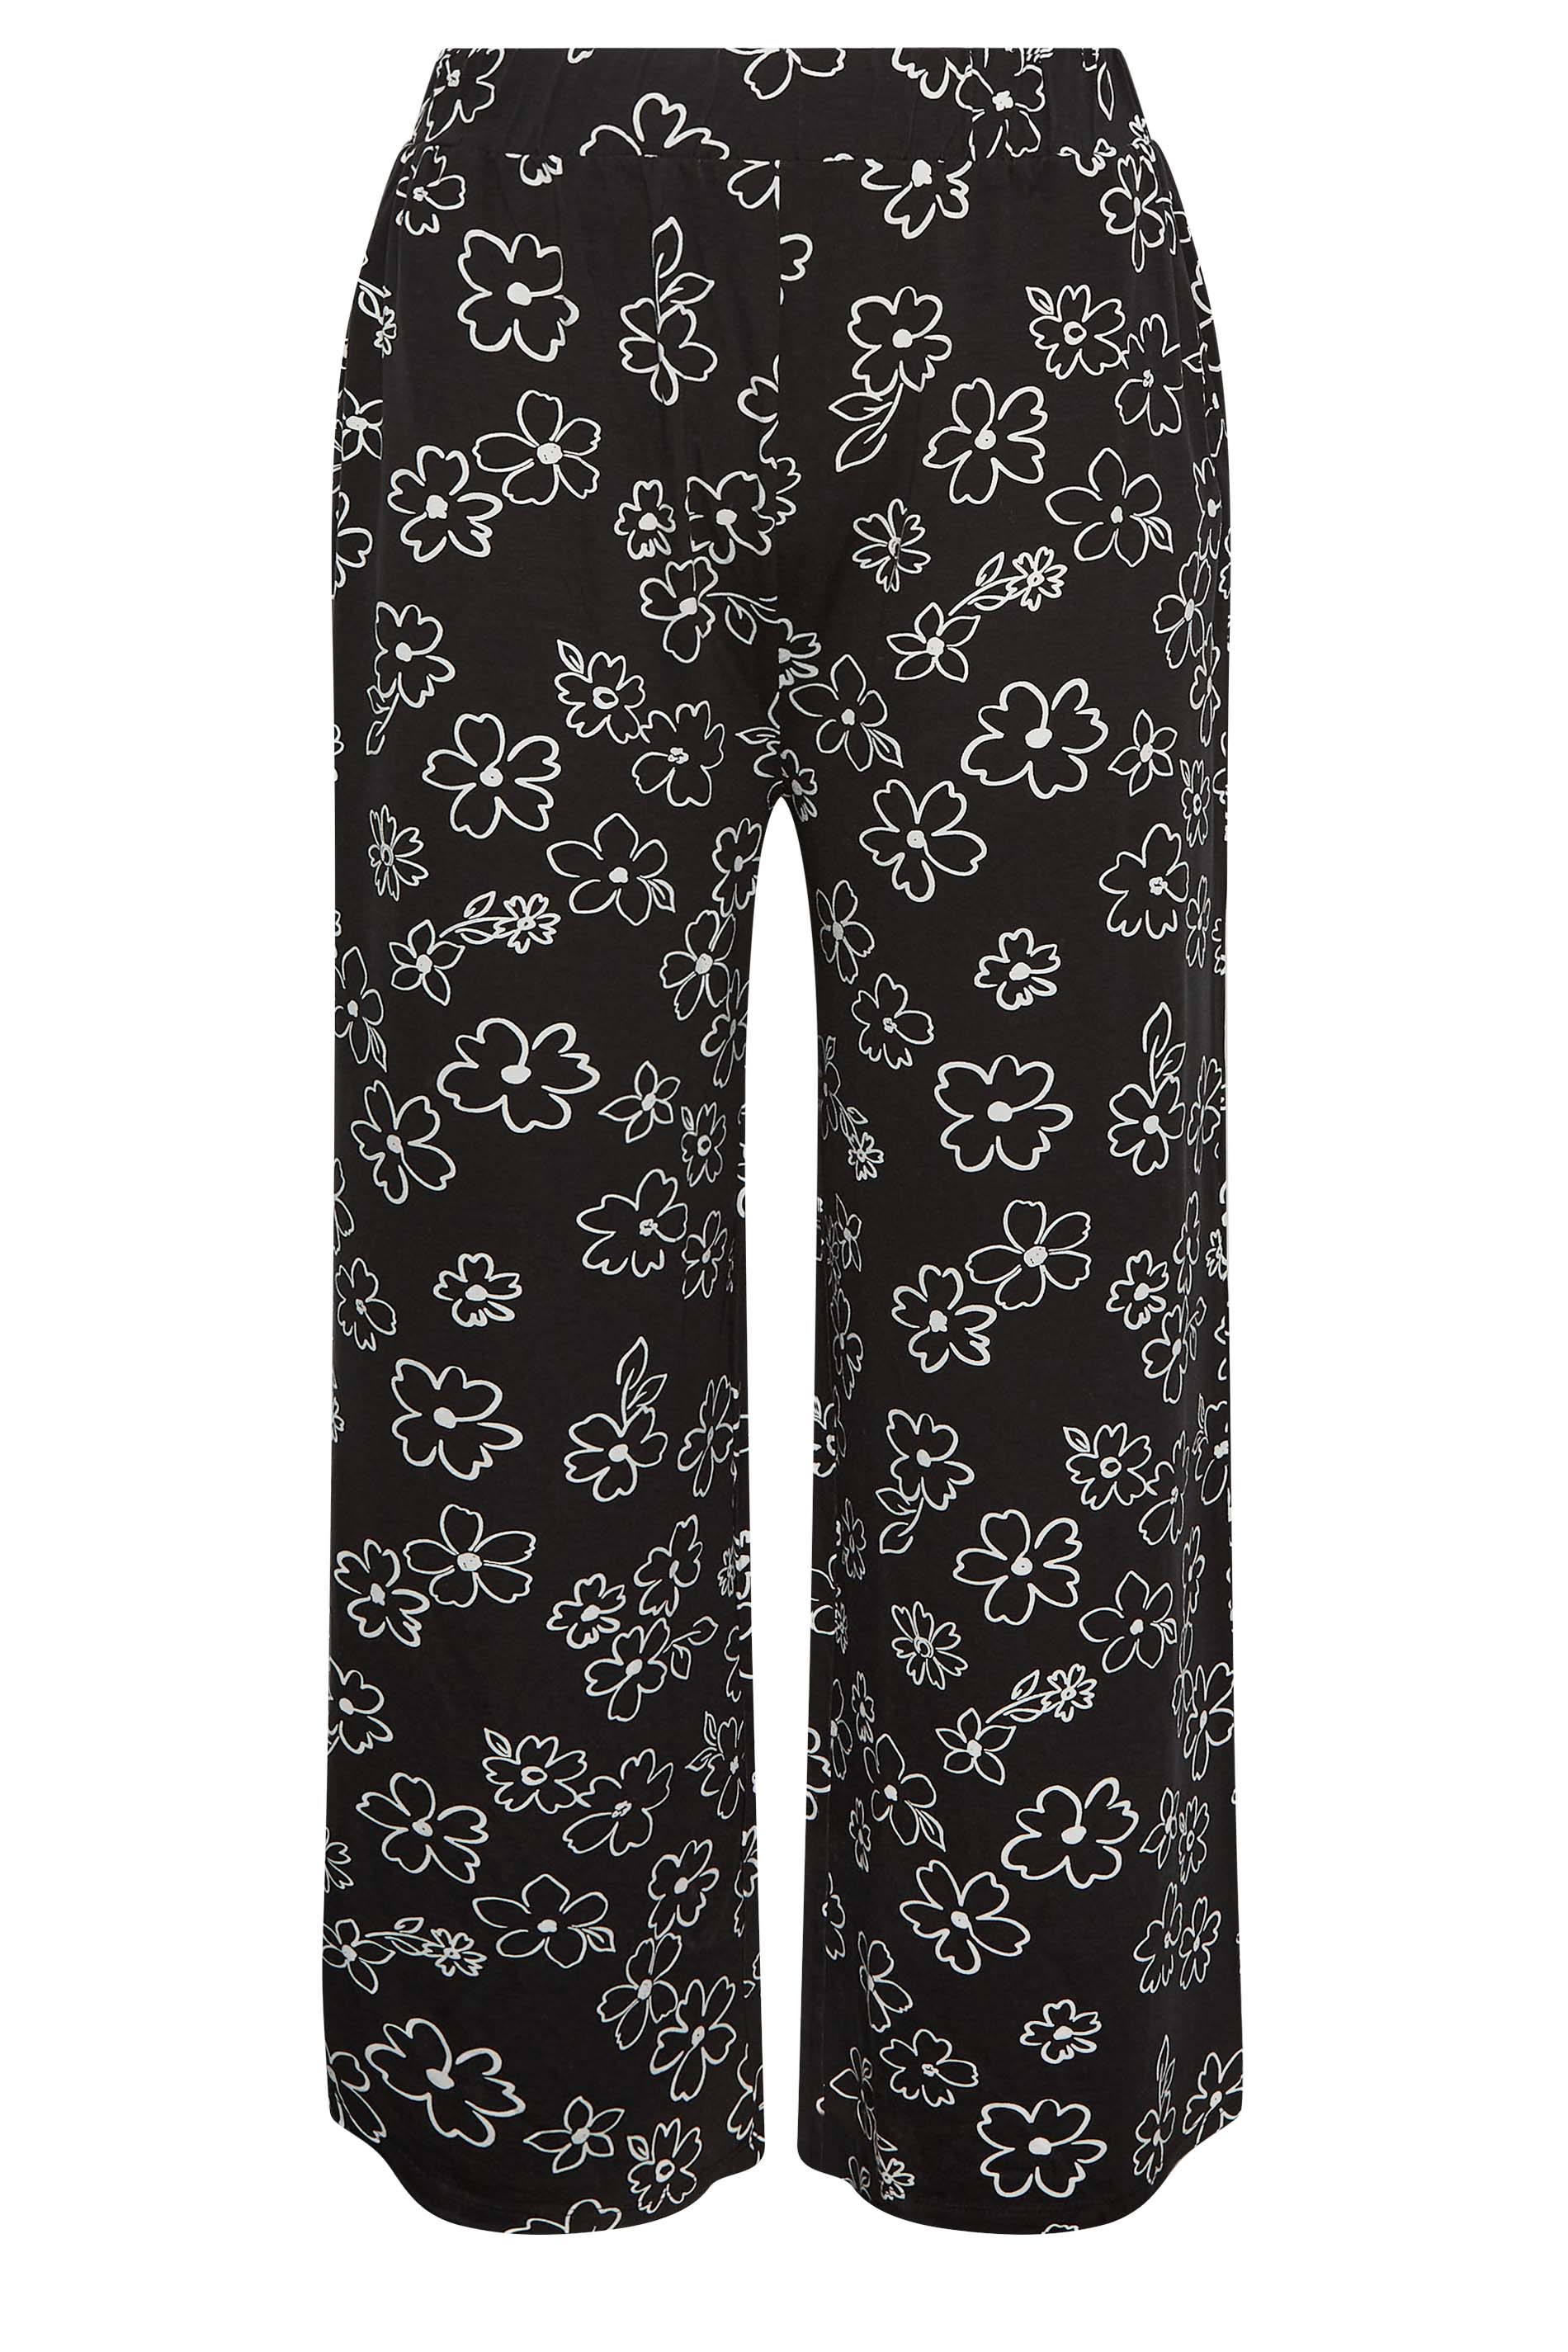 Buy Olive Floral Palazzo Pants Online At Best Price - Sassafras.in